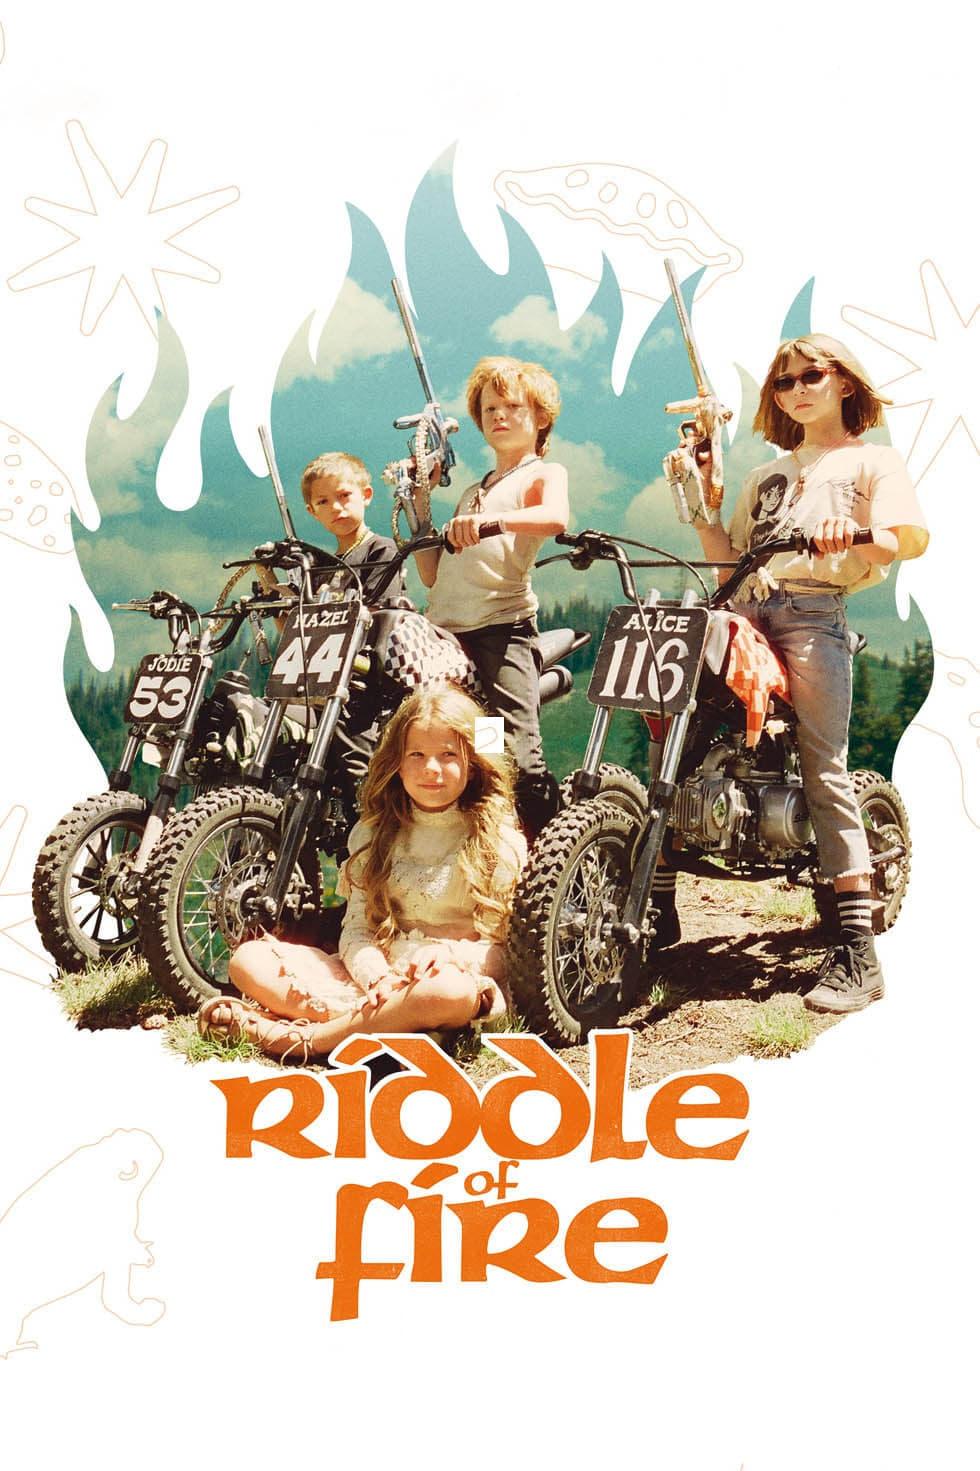 Riddle of Fire poster